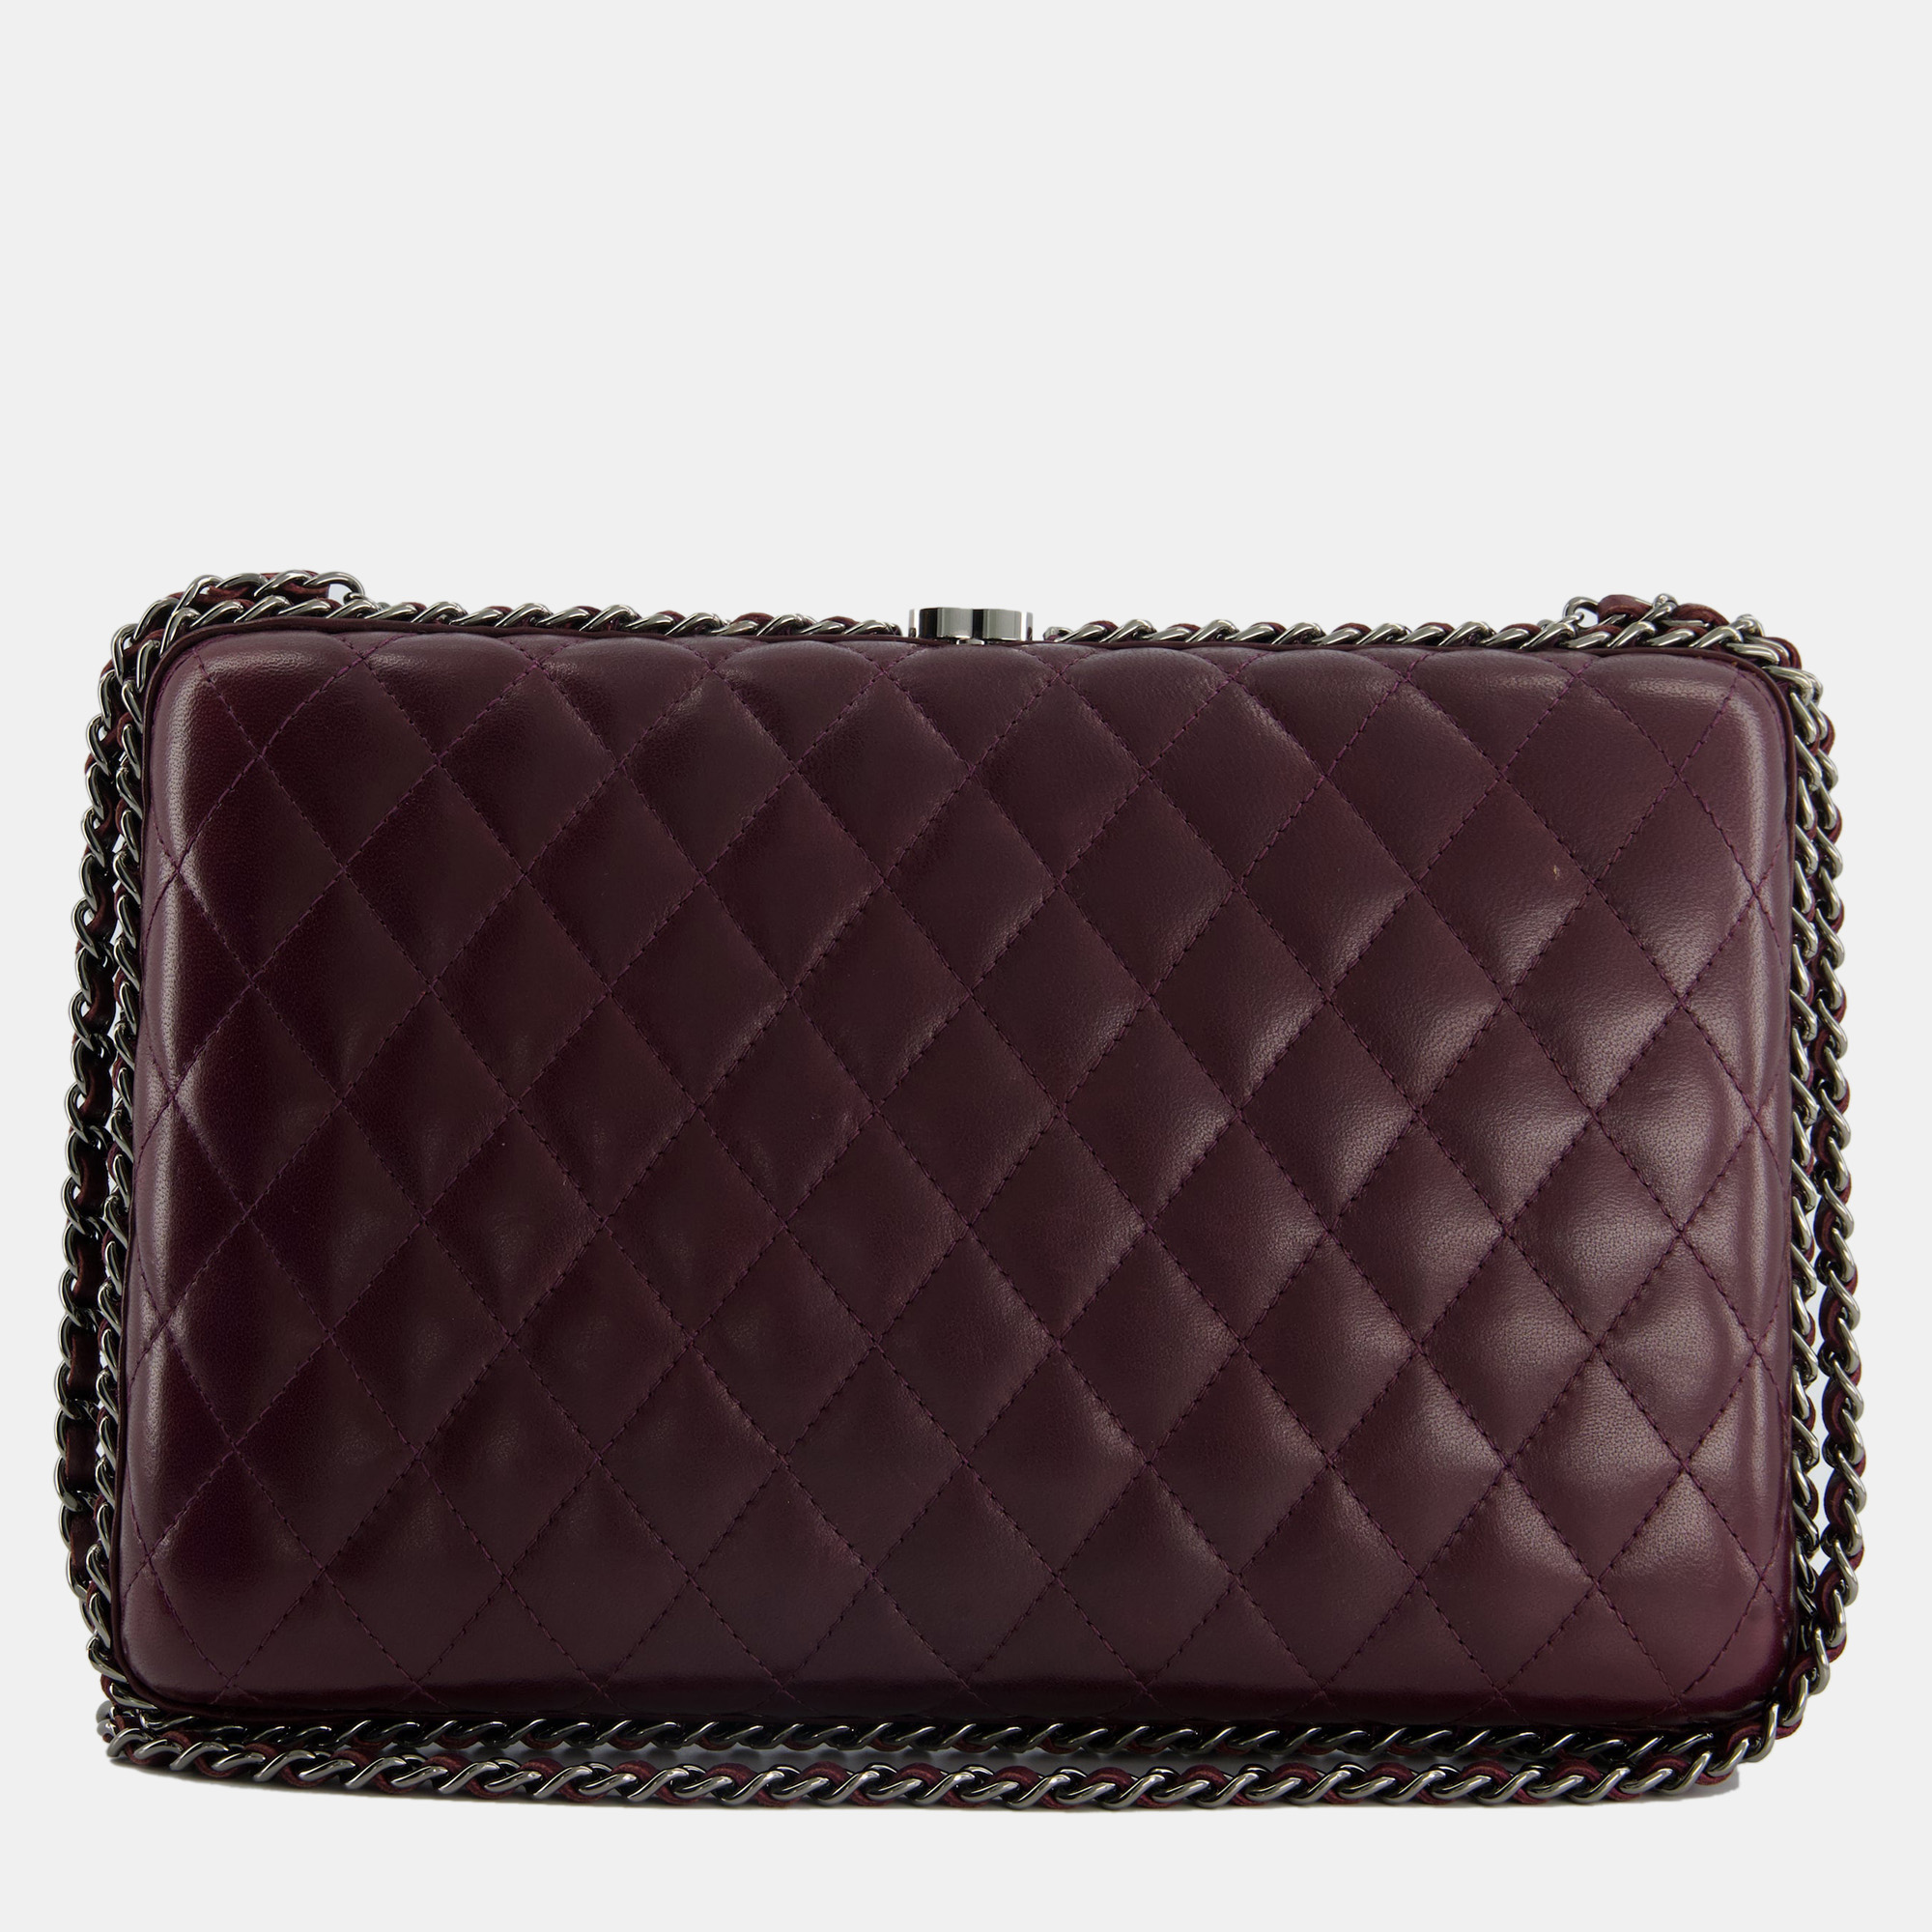 Chanel burgundy clutch on chain bag with chain details and gunmetal hardware